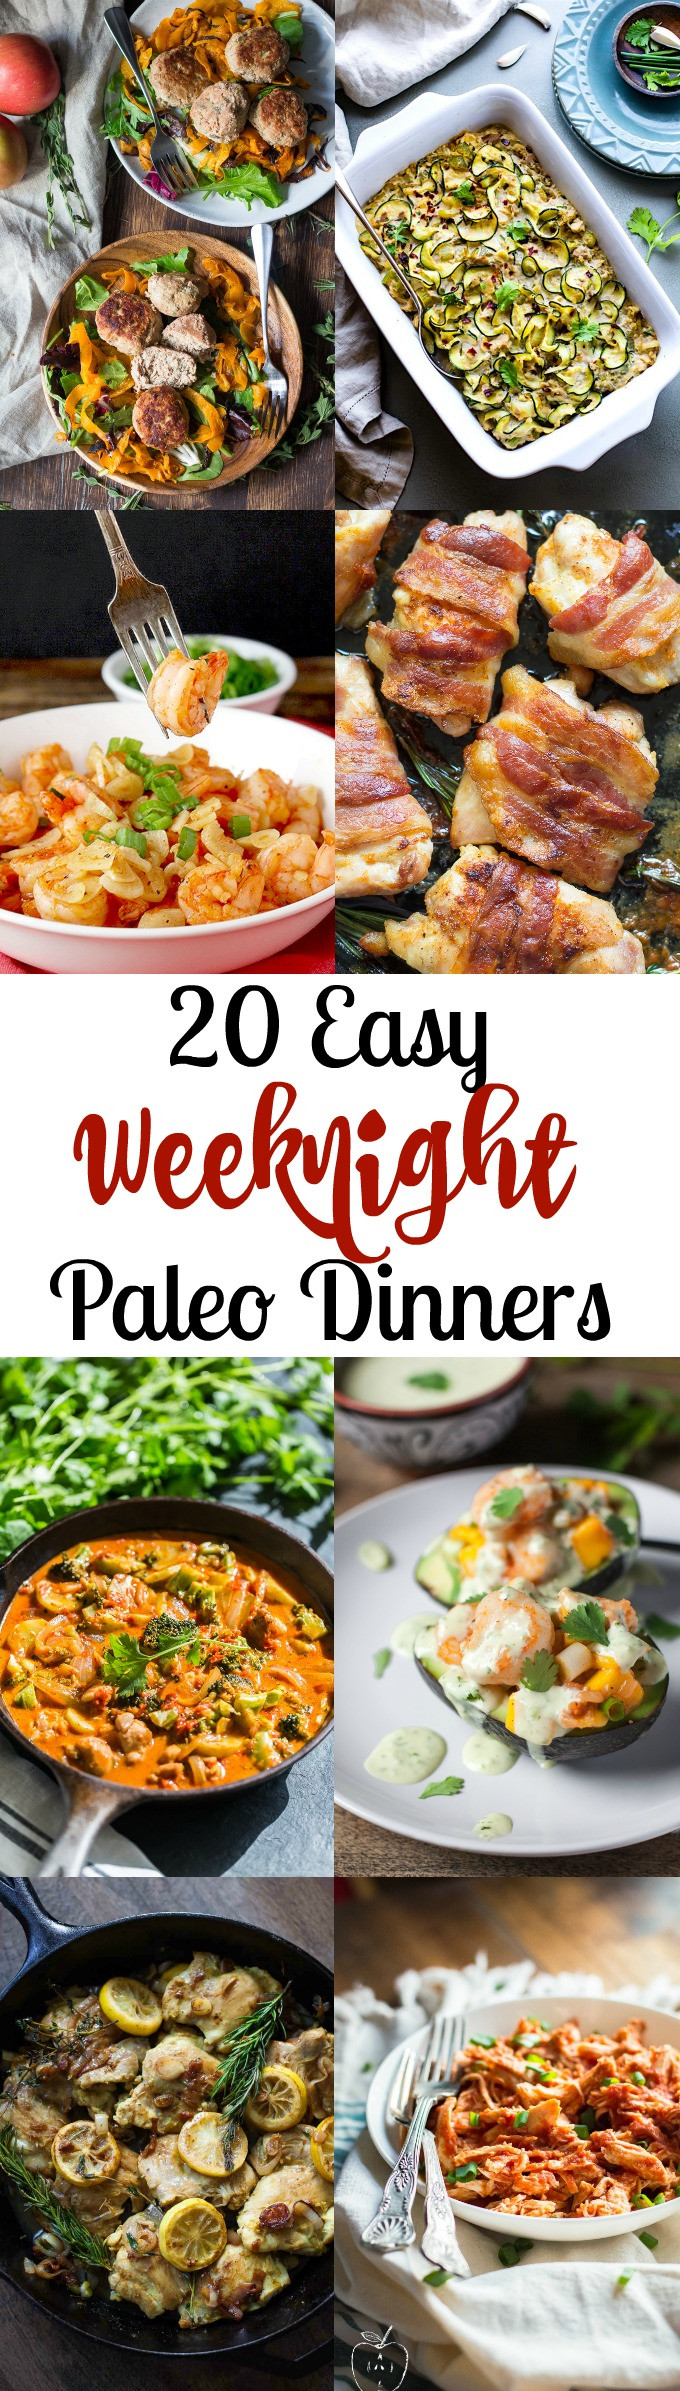 Healthy Paleo Dinners 20 Ideas for 20 Easy Paleo Dinners for Weeknights